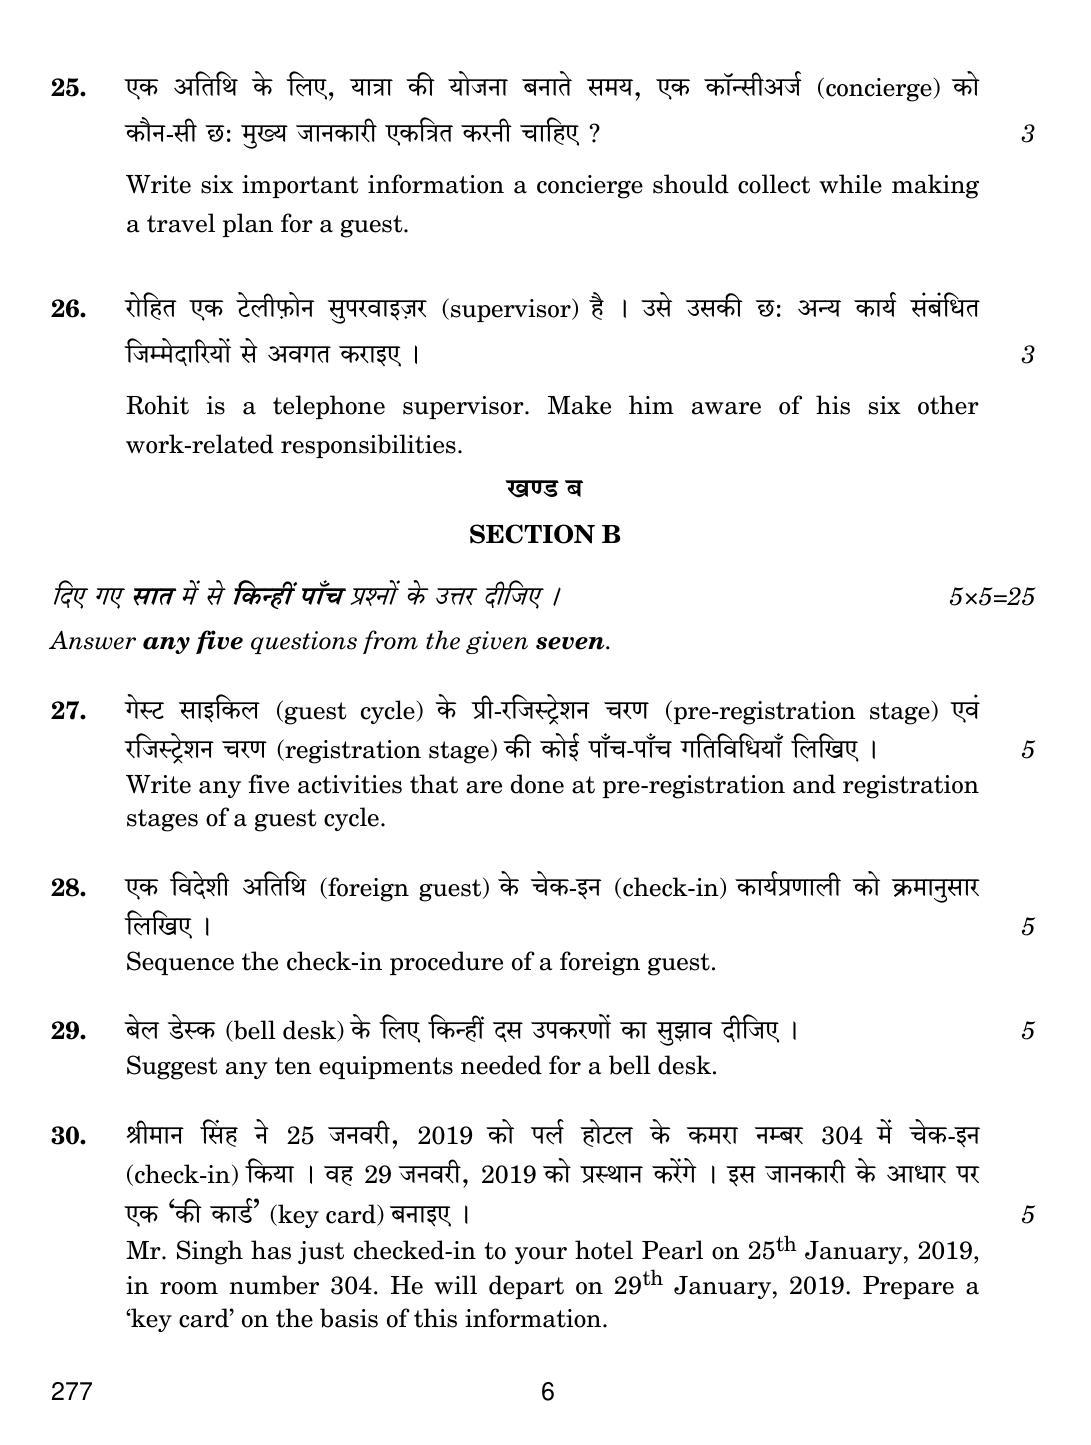 CBSE Class 12 277 Front Office Operations 2019 Question Paper - Page 6